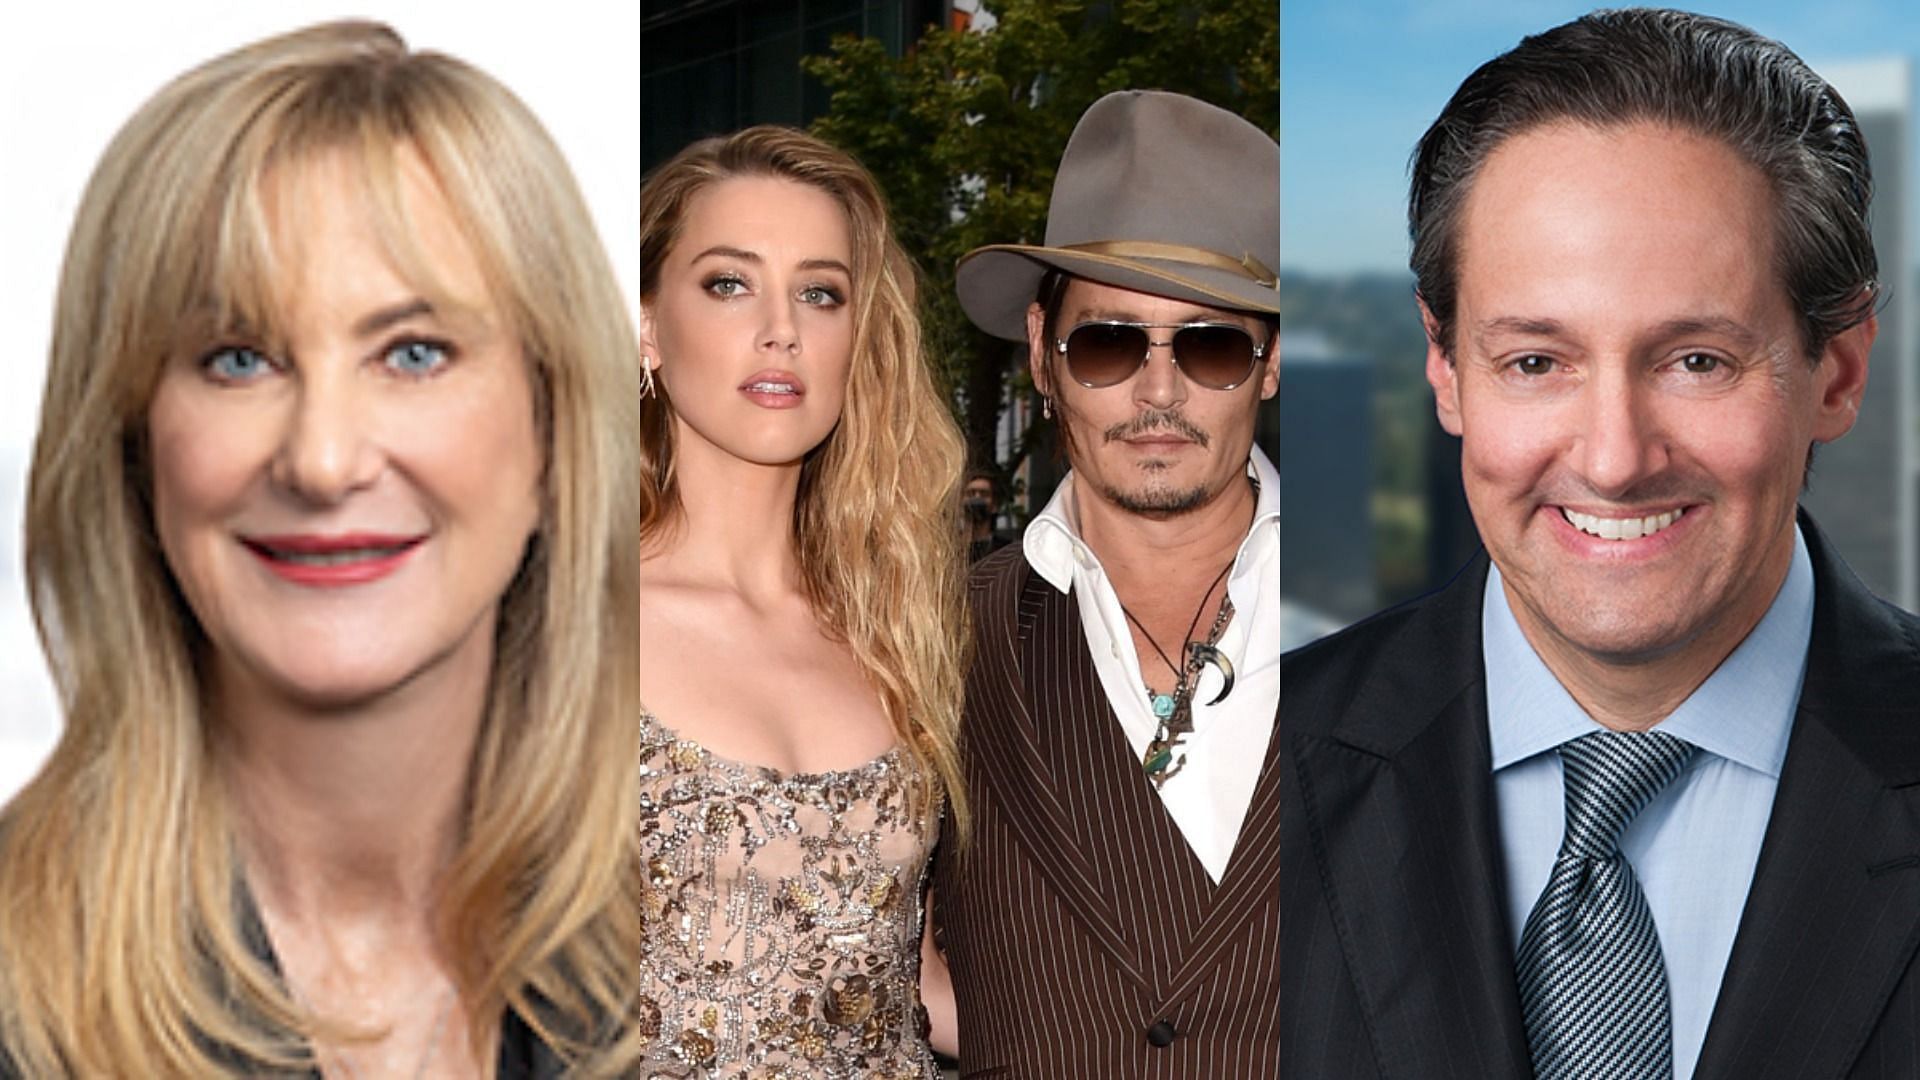 Amber Heard&#039;s former attorneys Michele Mulrooney and Eric George testified on her defamation trial against Johnny Depp (Image via Willkie LLP, Getty Images and Ellis George LLP)